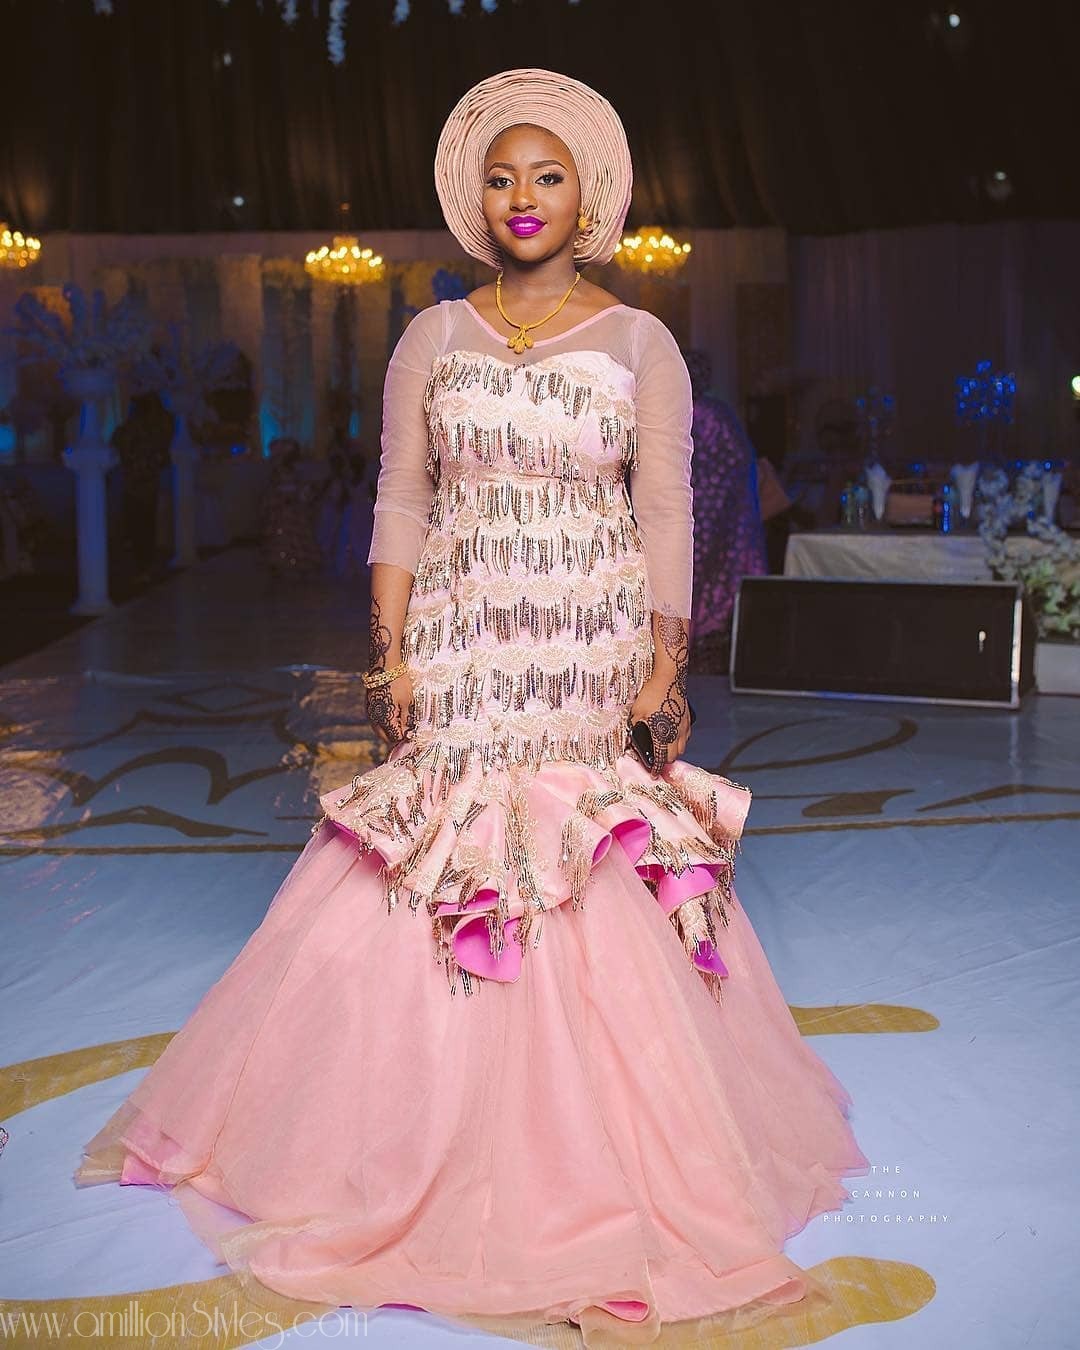 Our Hausa Brides Look Breath-taking!